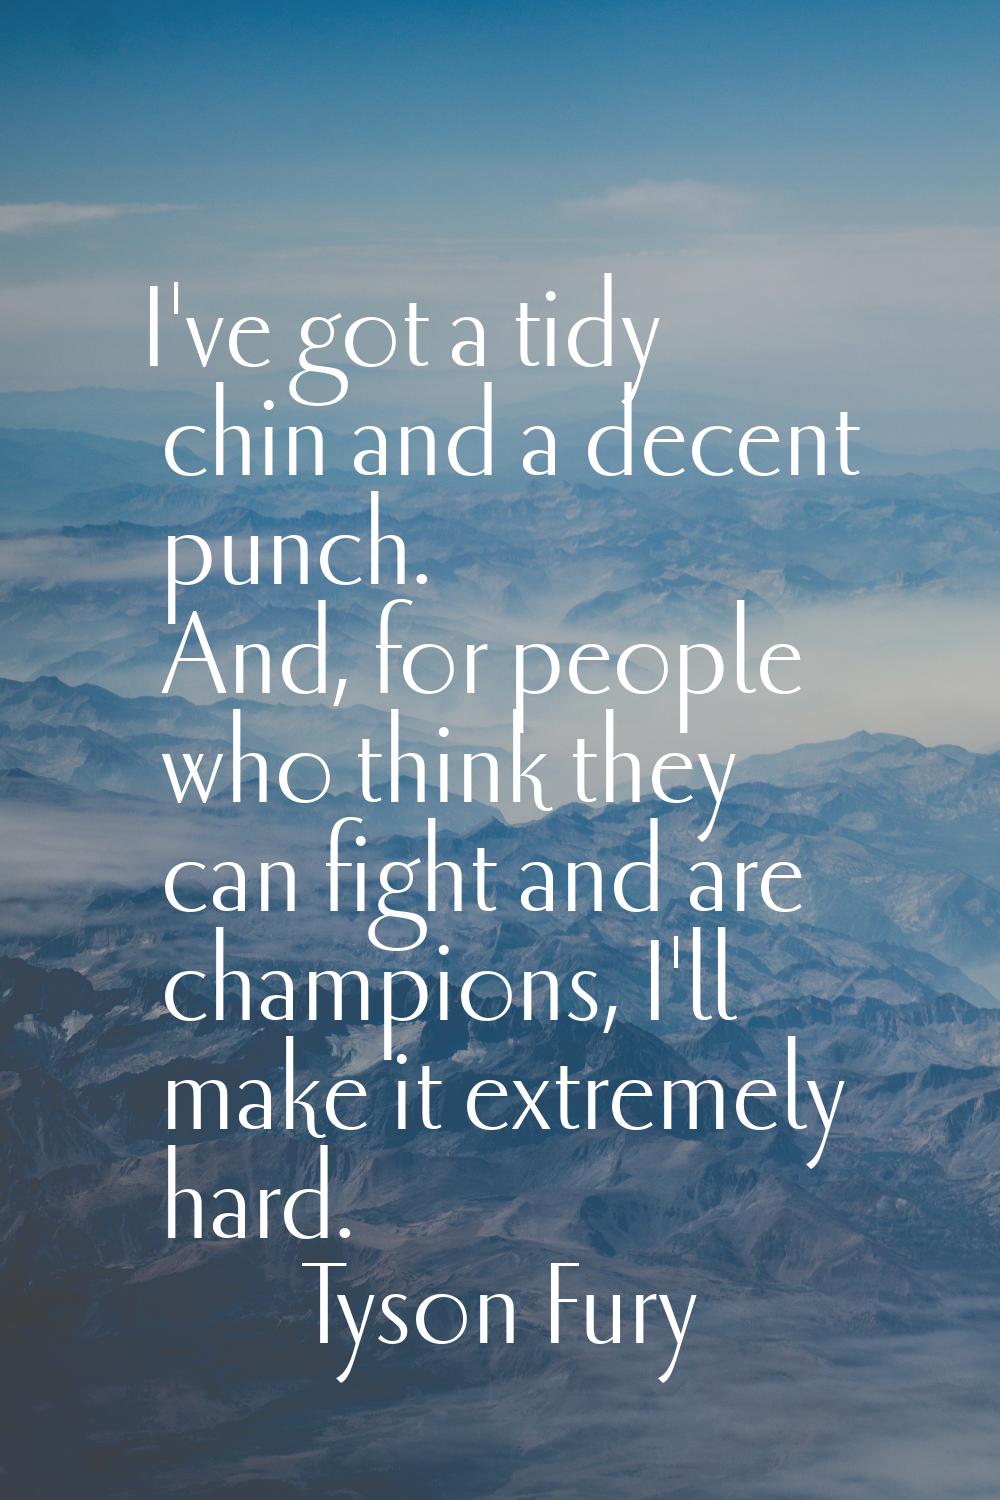 I've got a tidy chin and a decent punch. And, for people who think they can fight and are champions